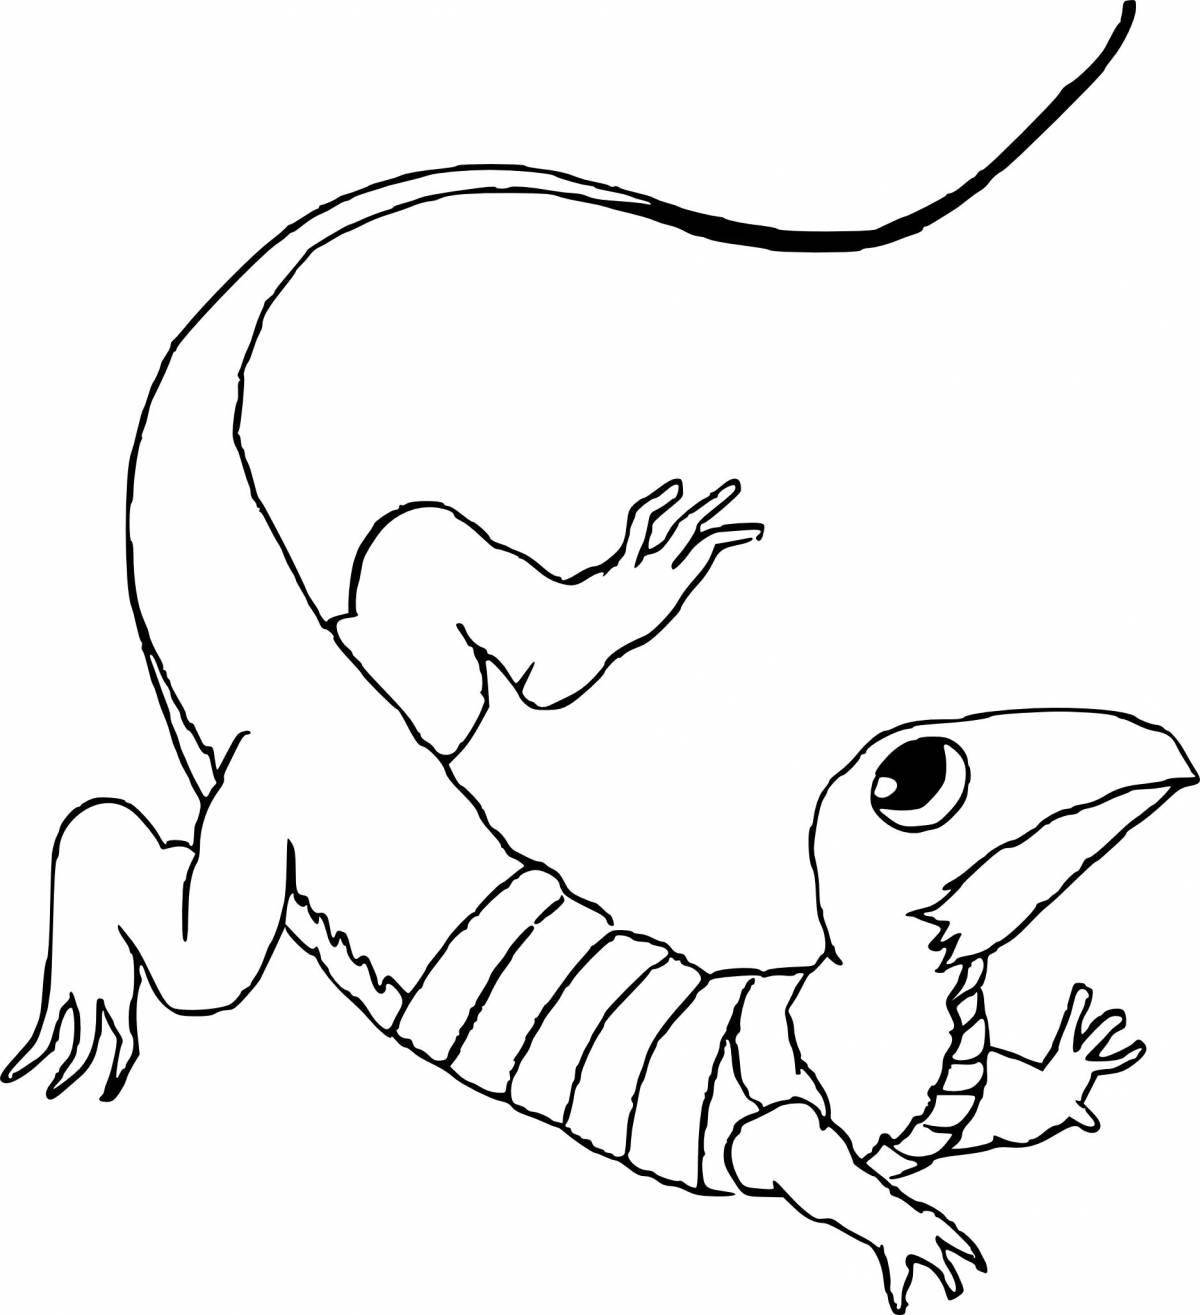 Intricate reptile coloring pages